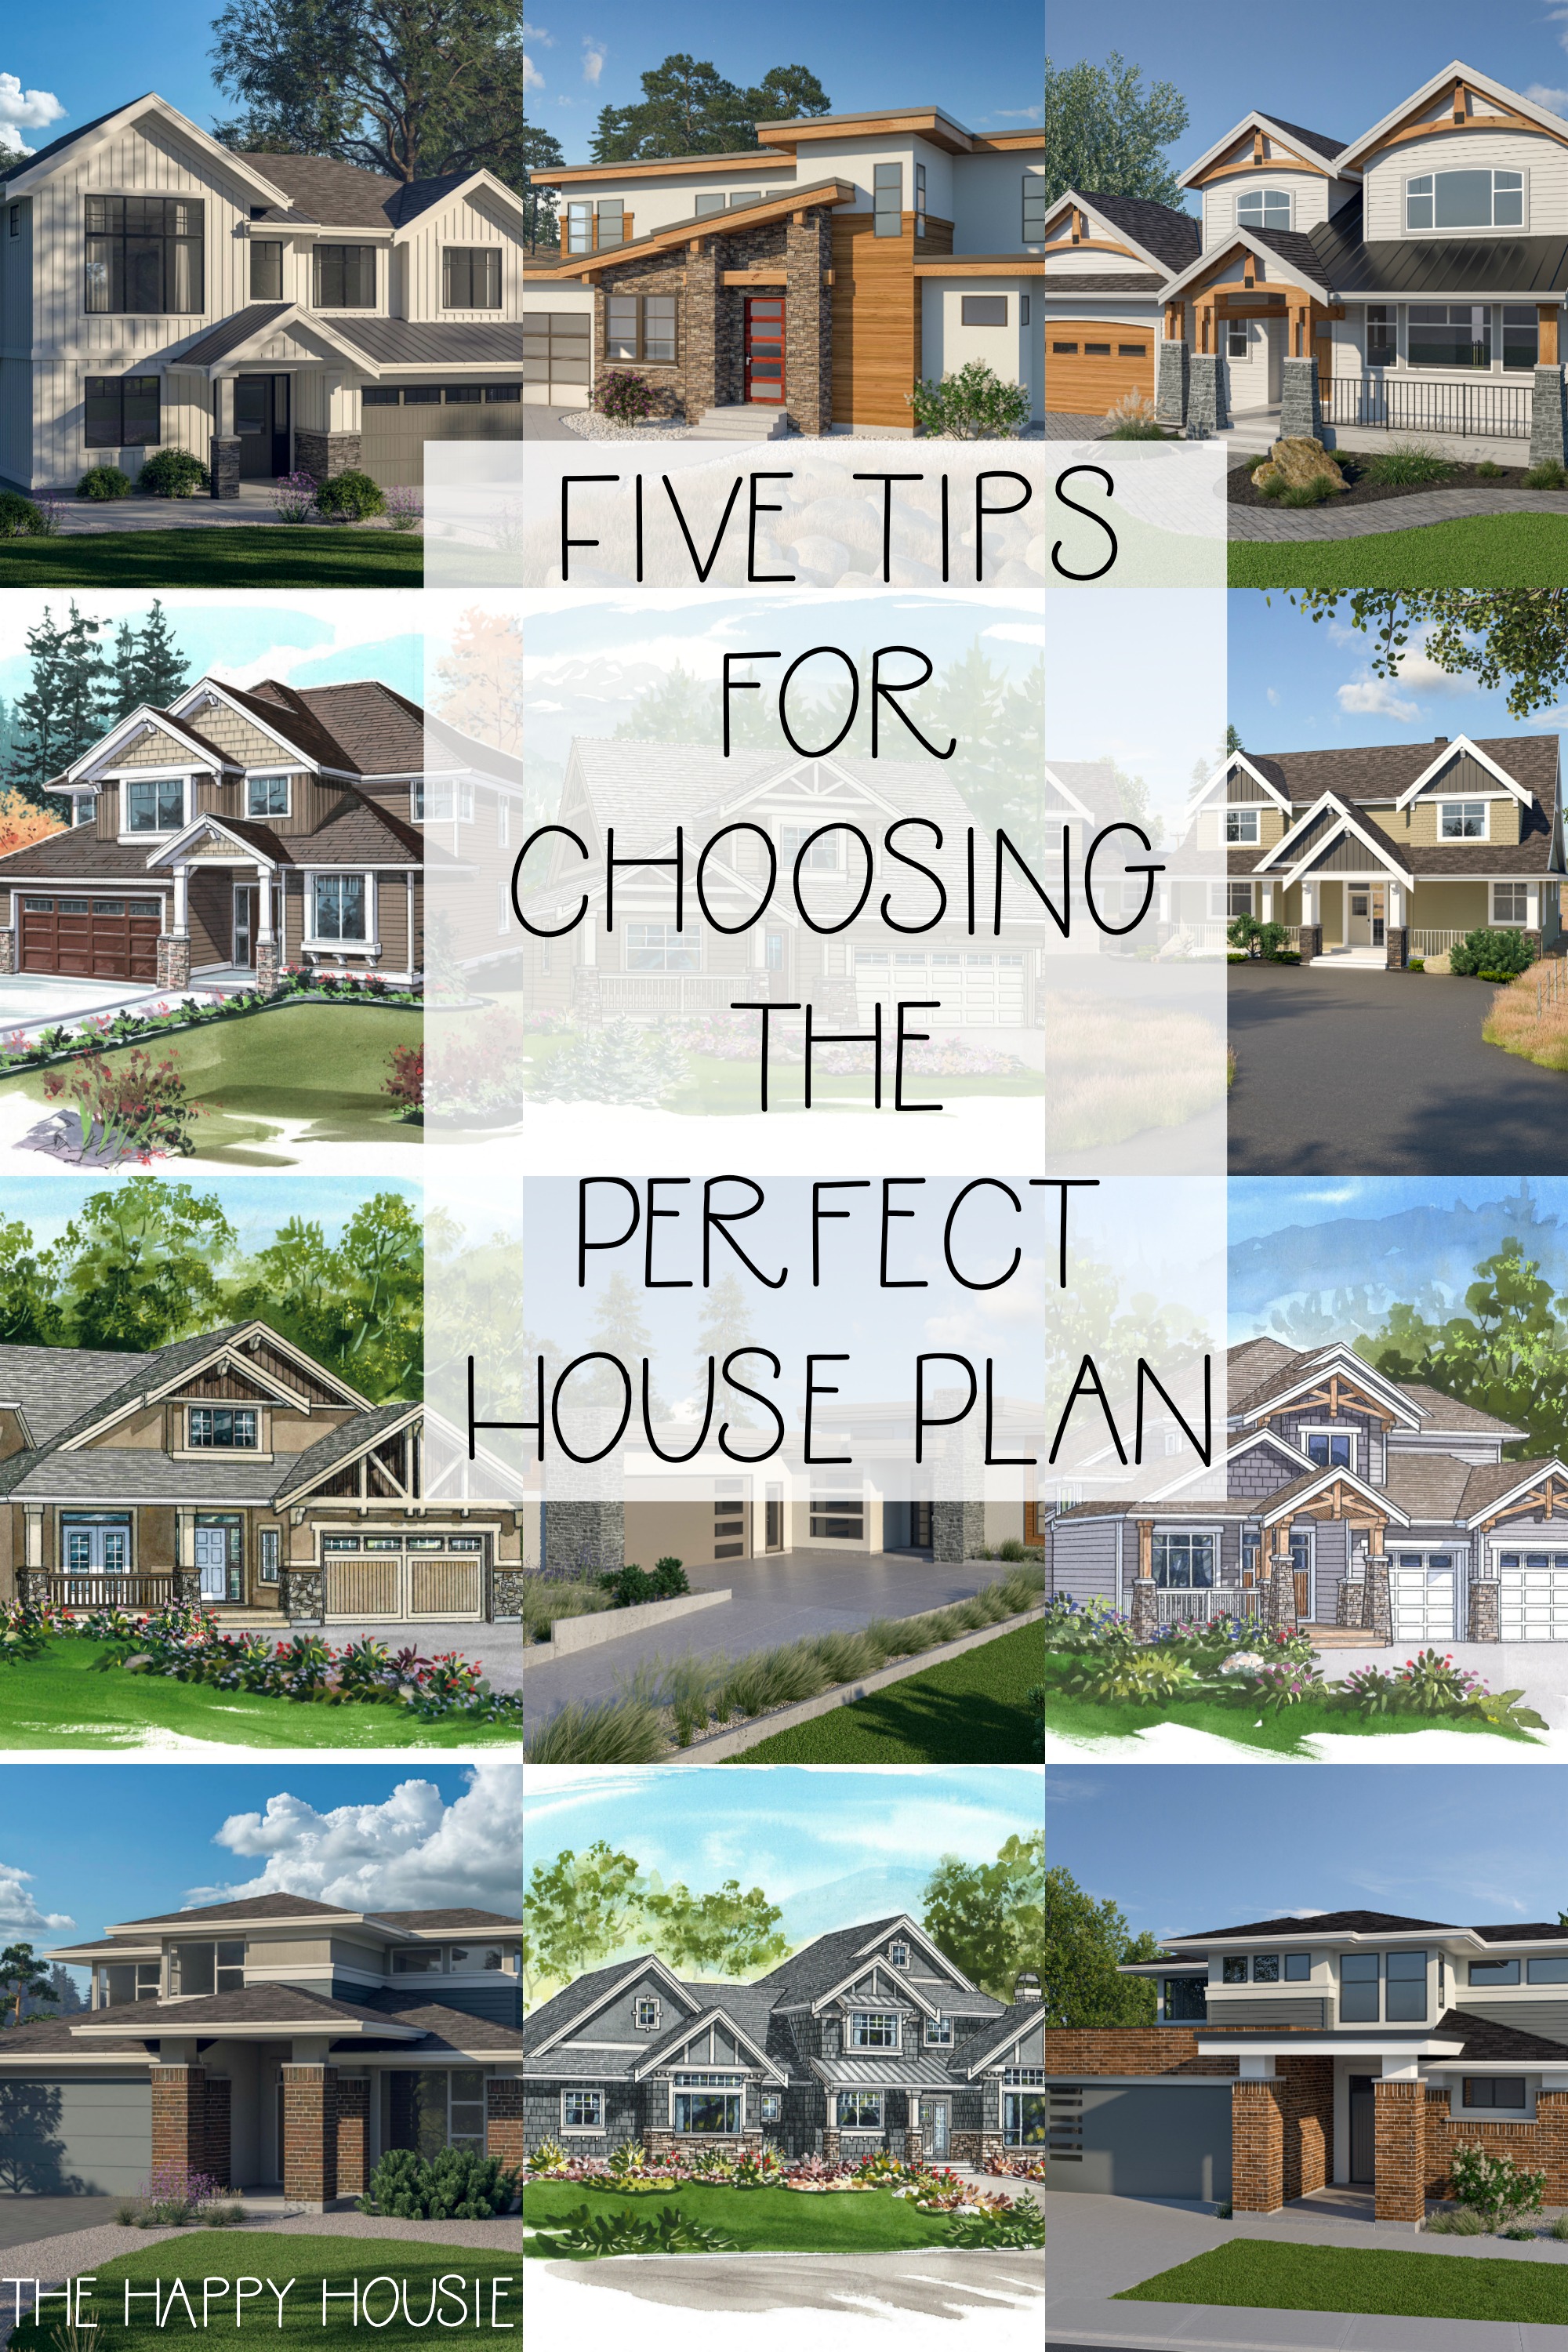 Five Tips For Choosing The Perfect House Plan poster.